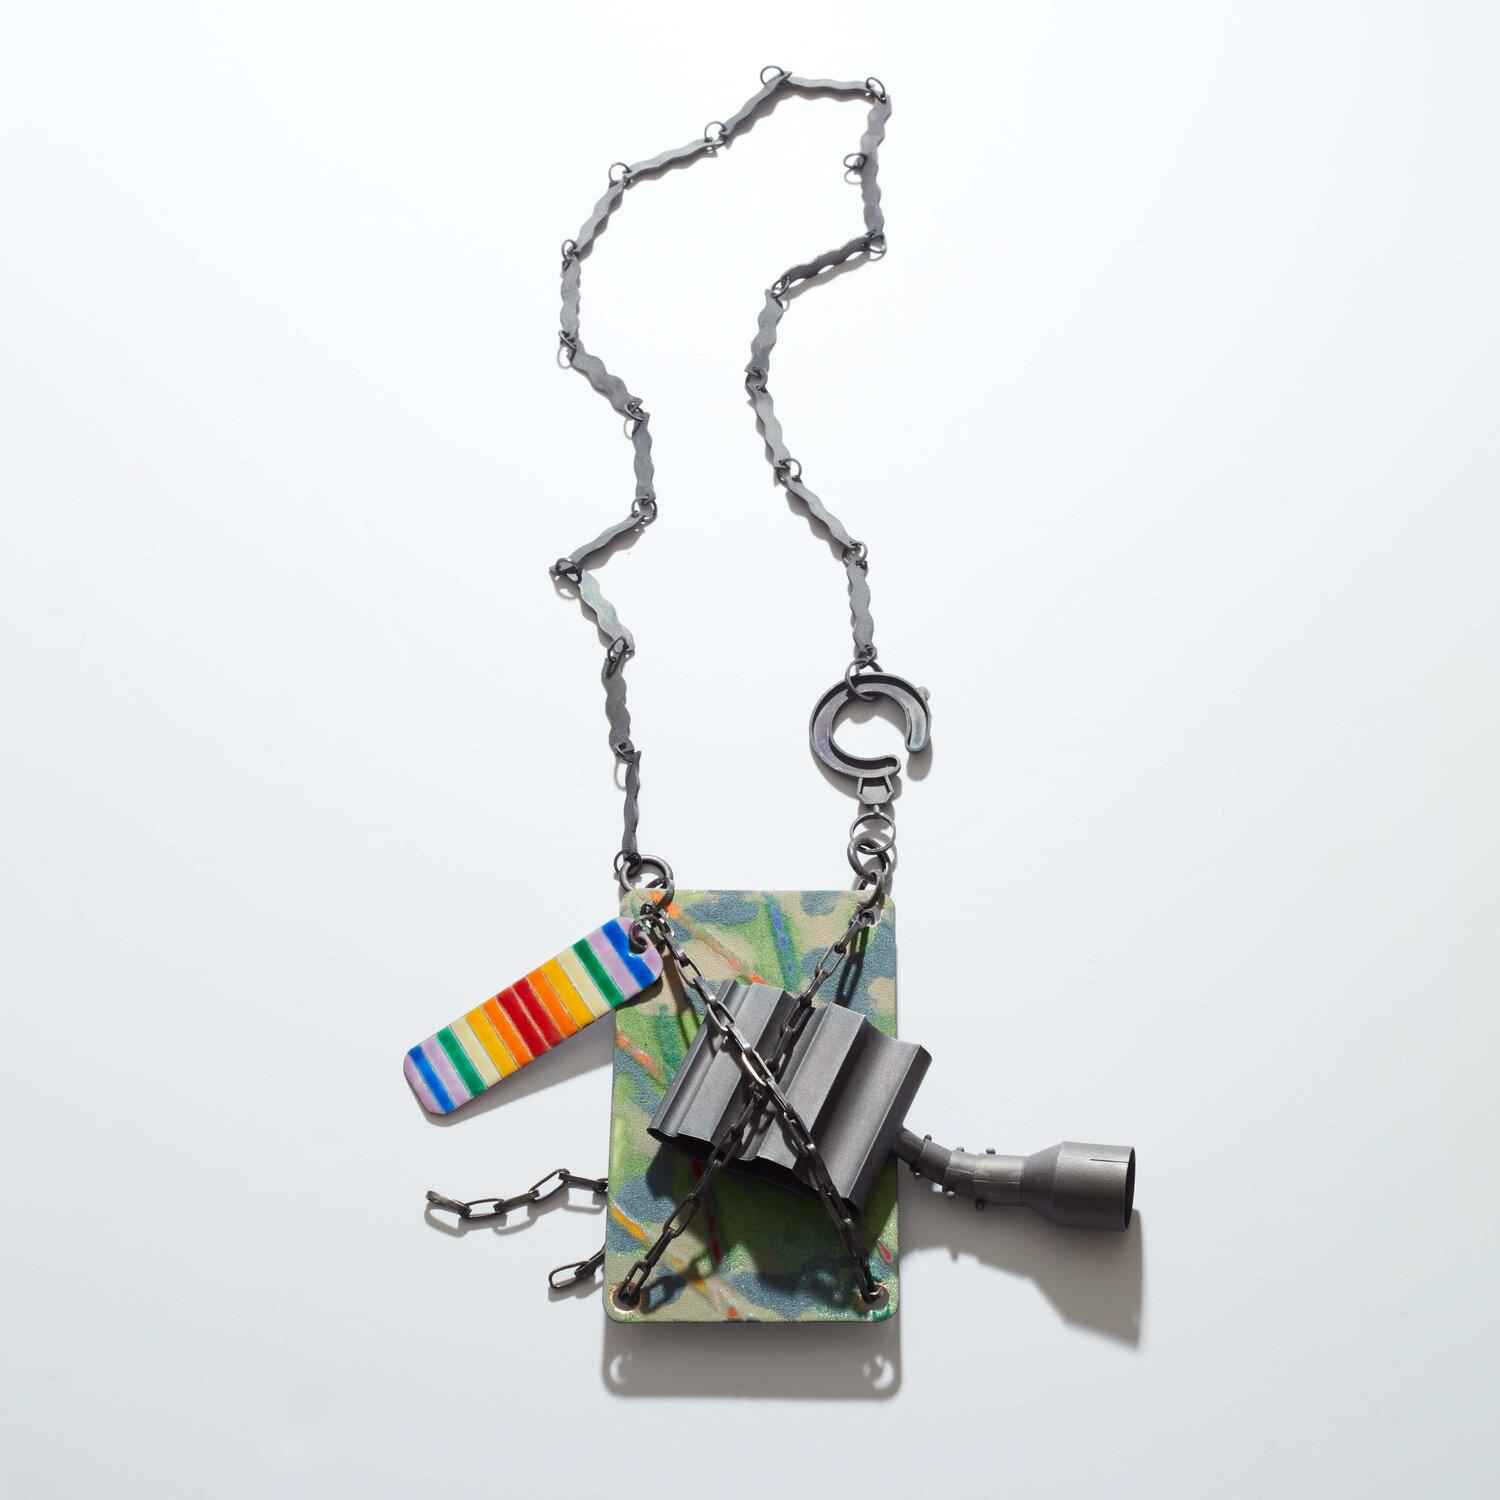 Necklace composed of brightly coloured metal pieces hang on a grey linked chain